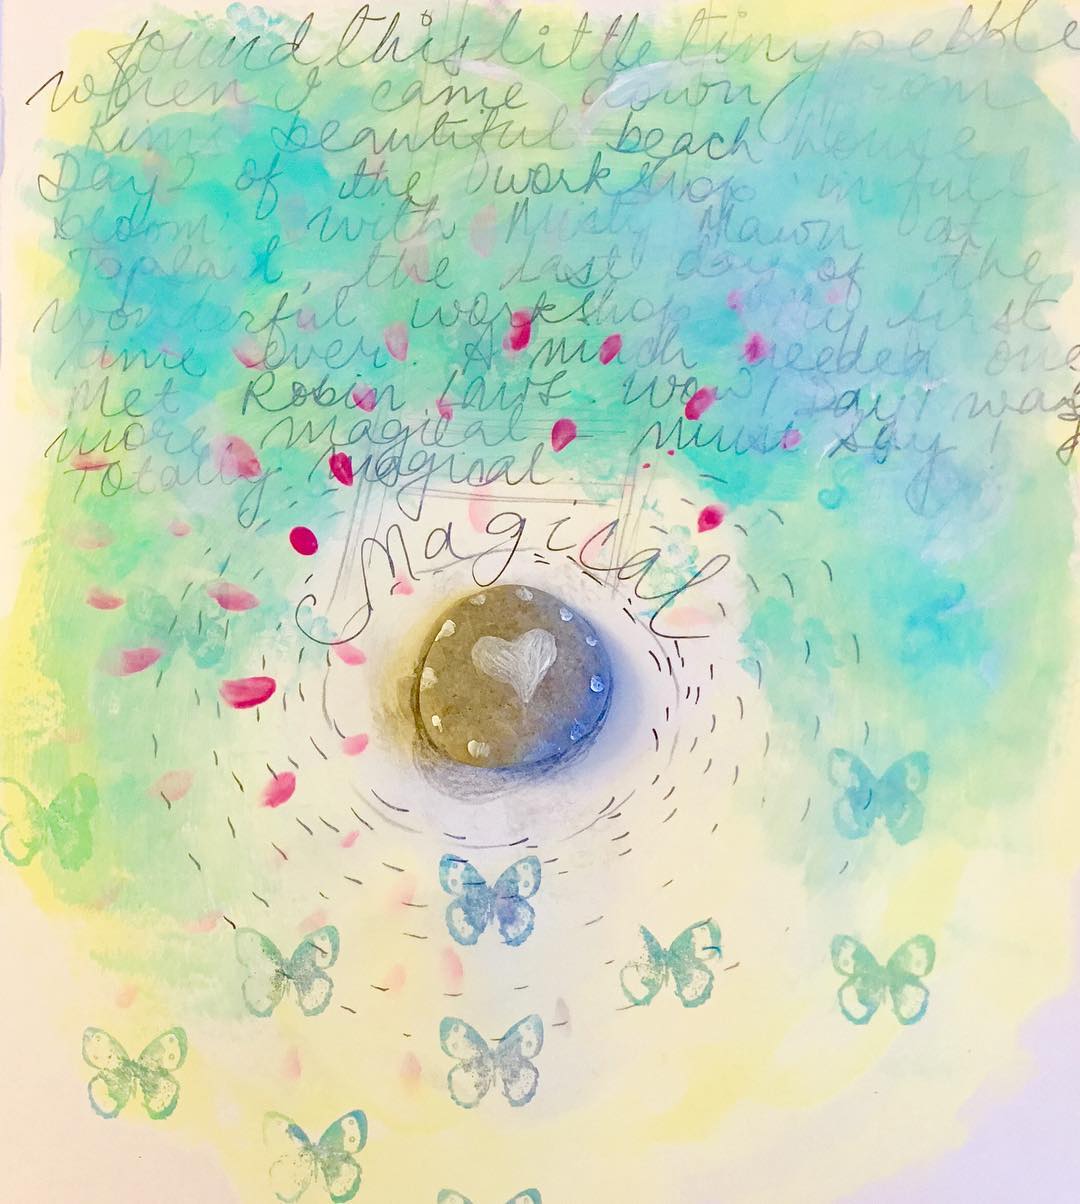 Thanks for the beautiful, magical experience! Picked up this pebble y'day...just wanted to thank you @mistymawn and @kimbeller for everything and @rlaws2 for showing me the light!

Daily Art Journal 
Day1